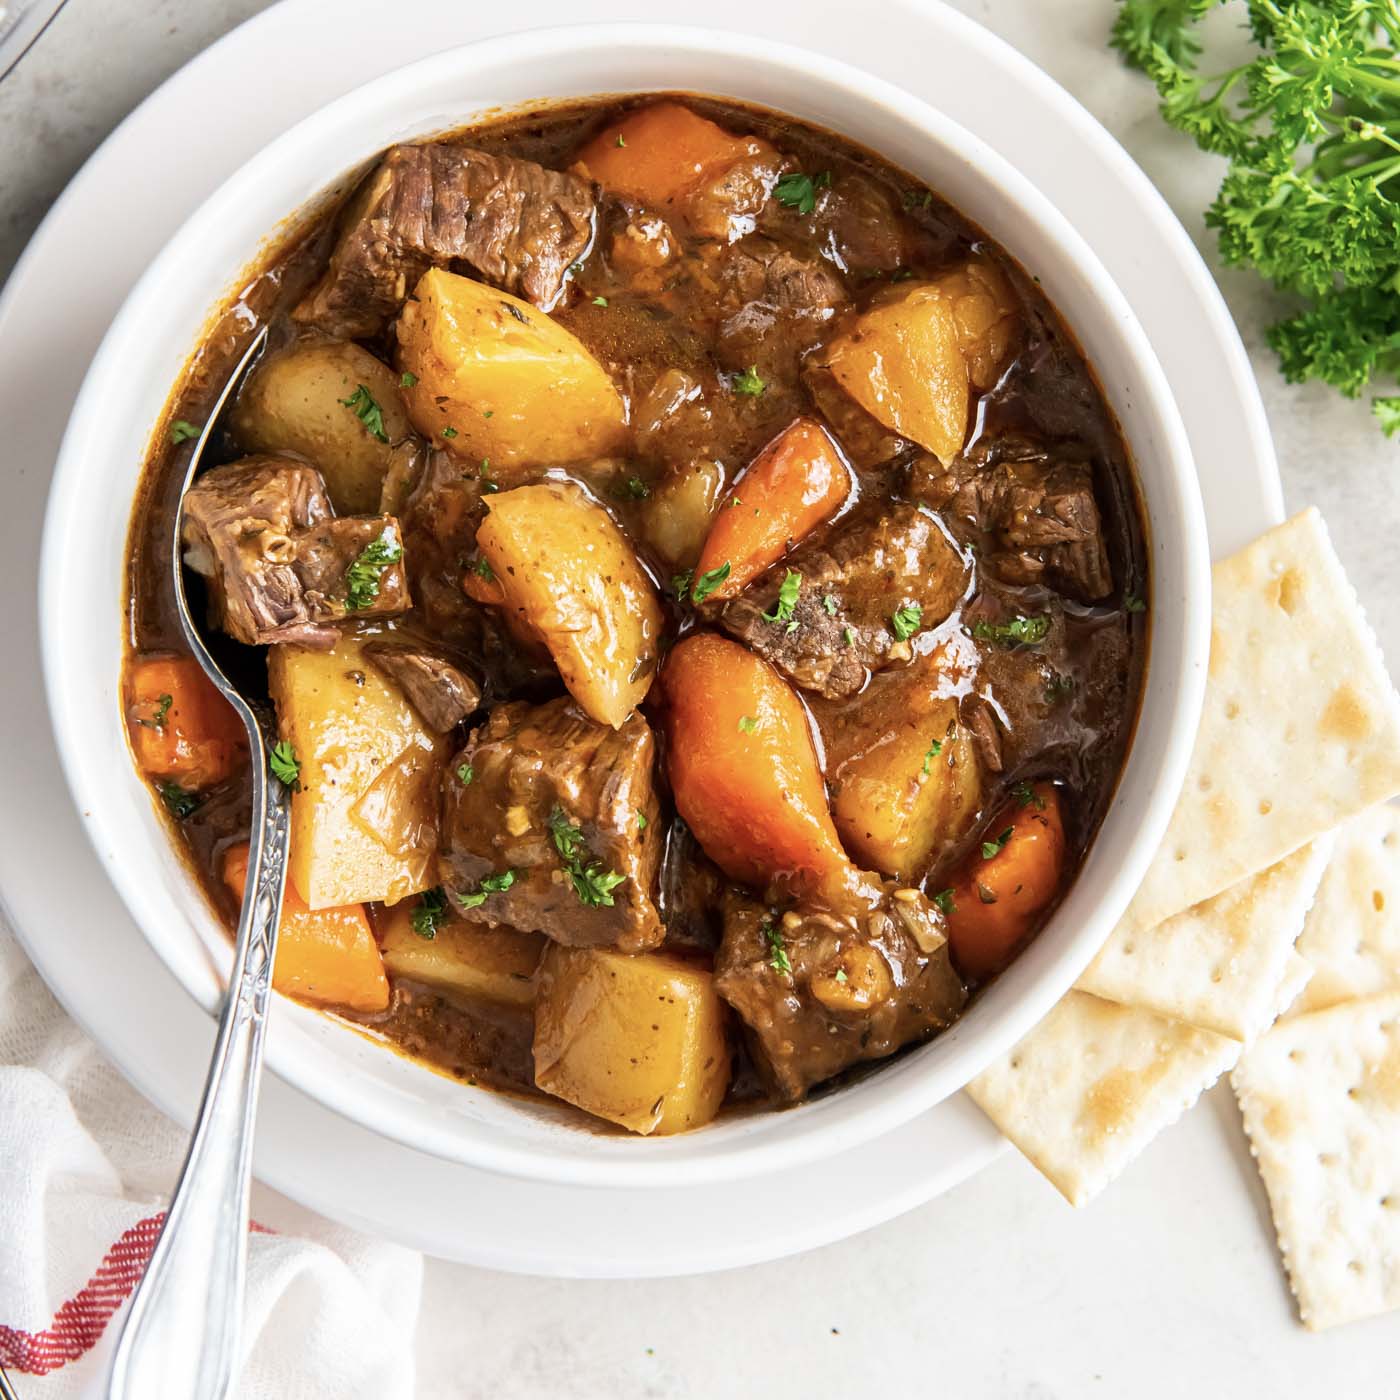 What is the minimum and maximum cooking time for Meat/Stew